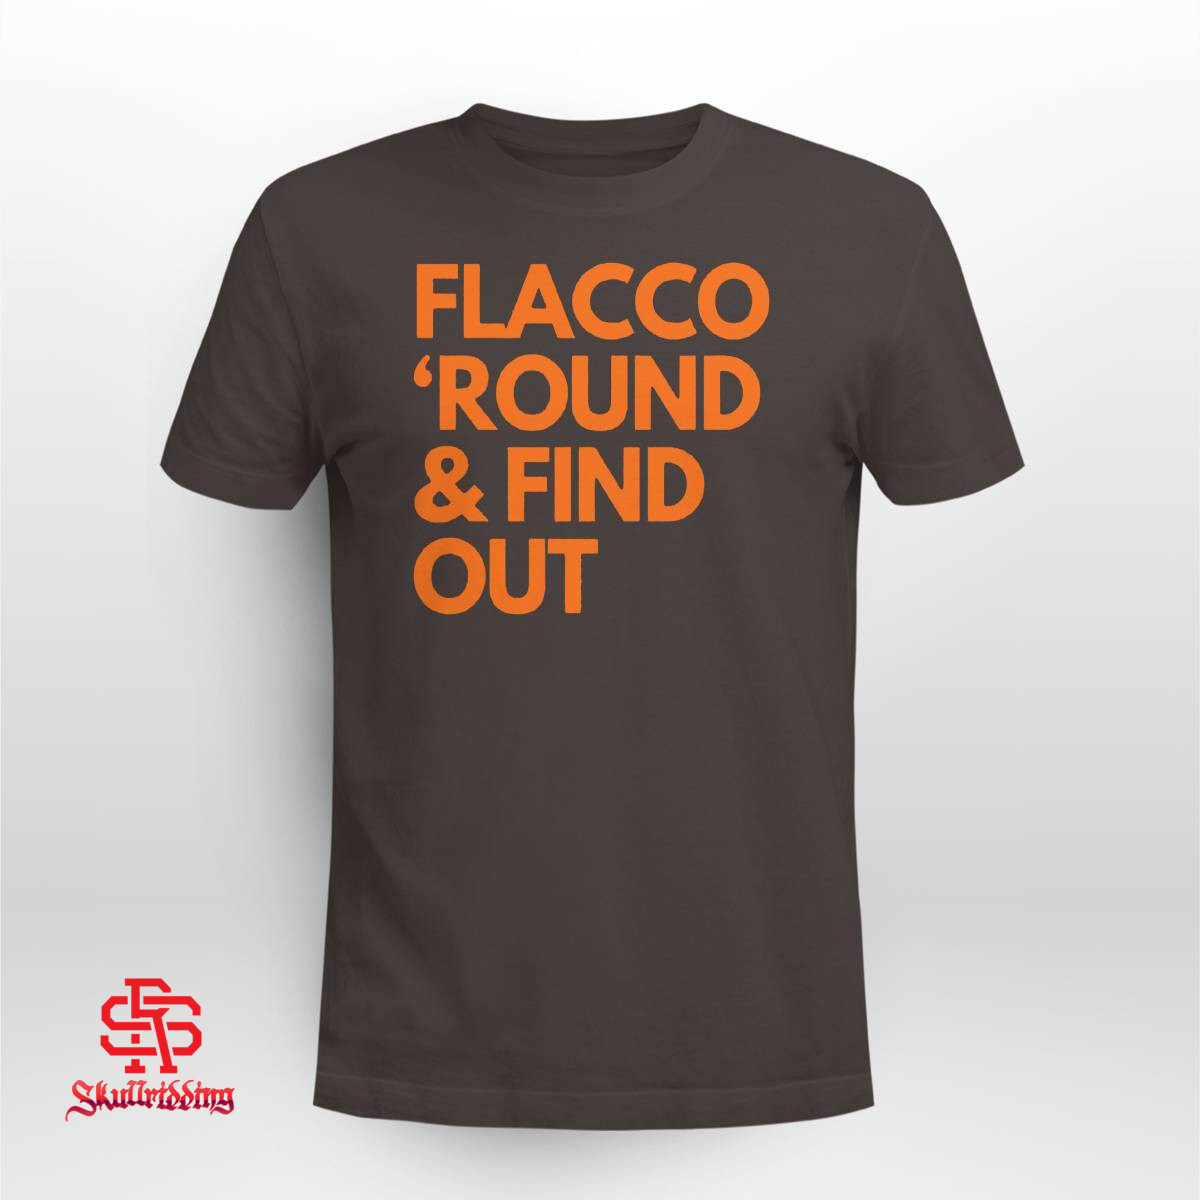 Joe Flacco 'Round and Find Out T-Shirt Cleveland Browns